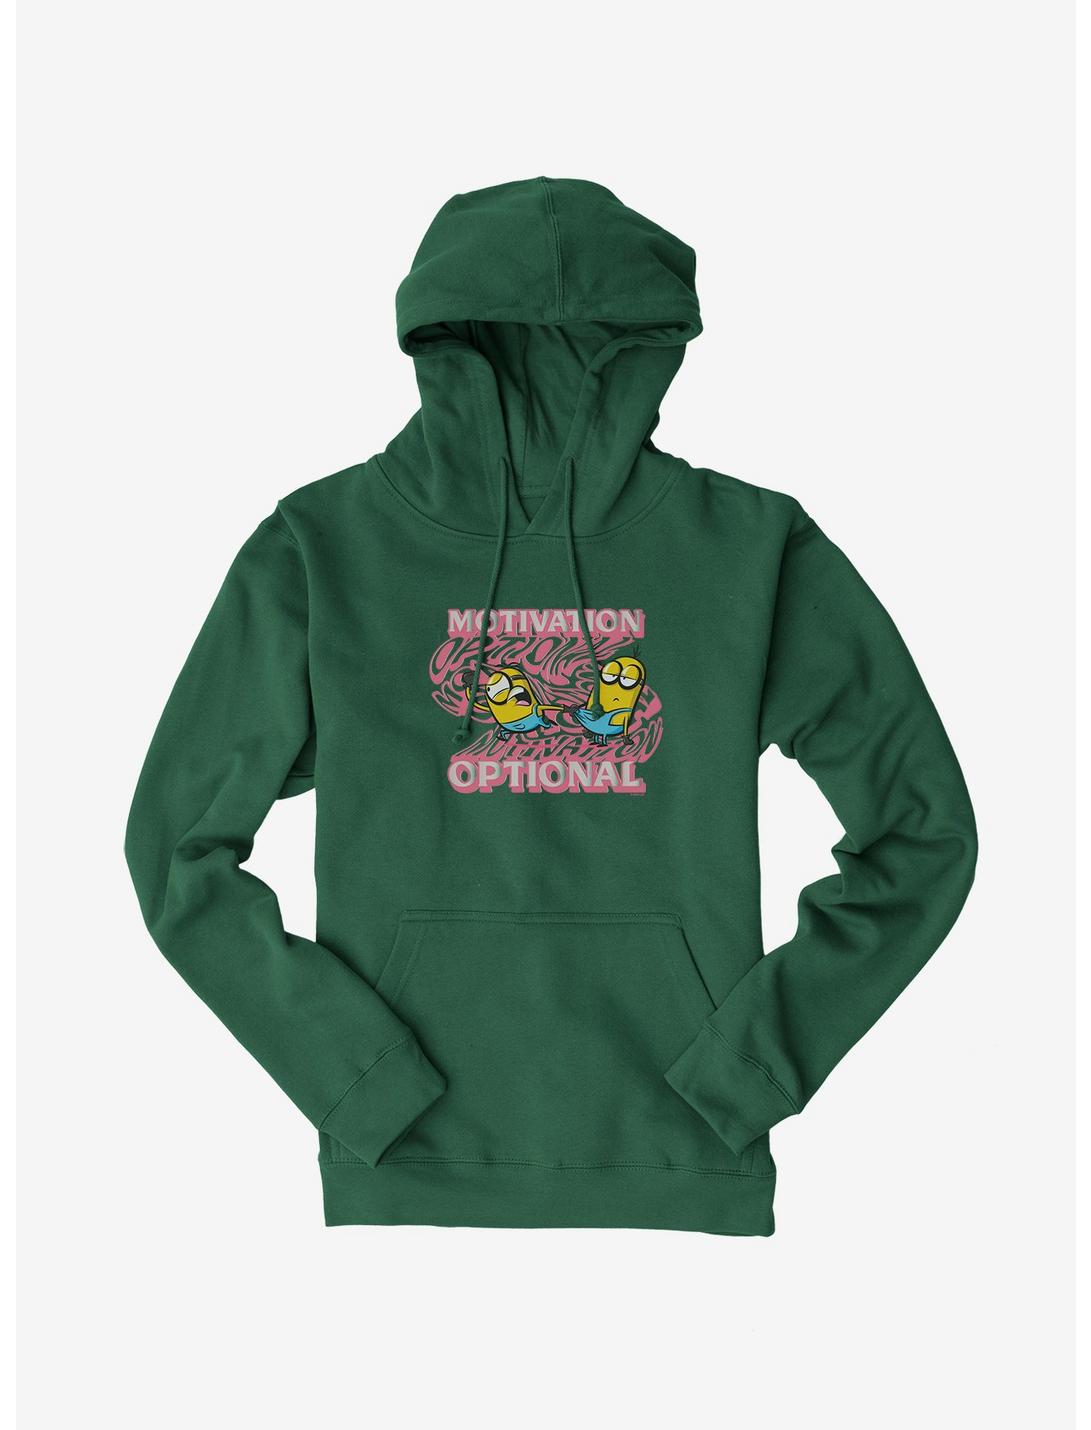 Minions Groovy Motivation Optional Hoodie, FOREST, hi-res